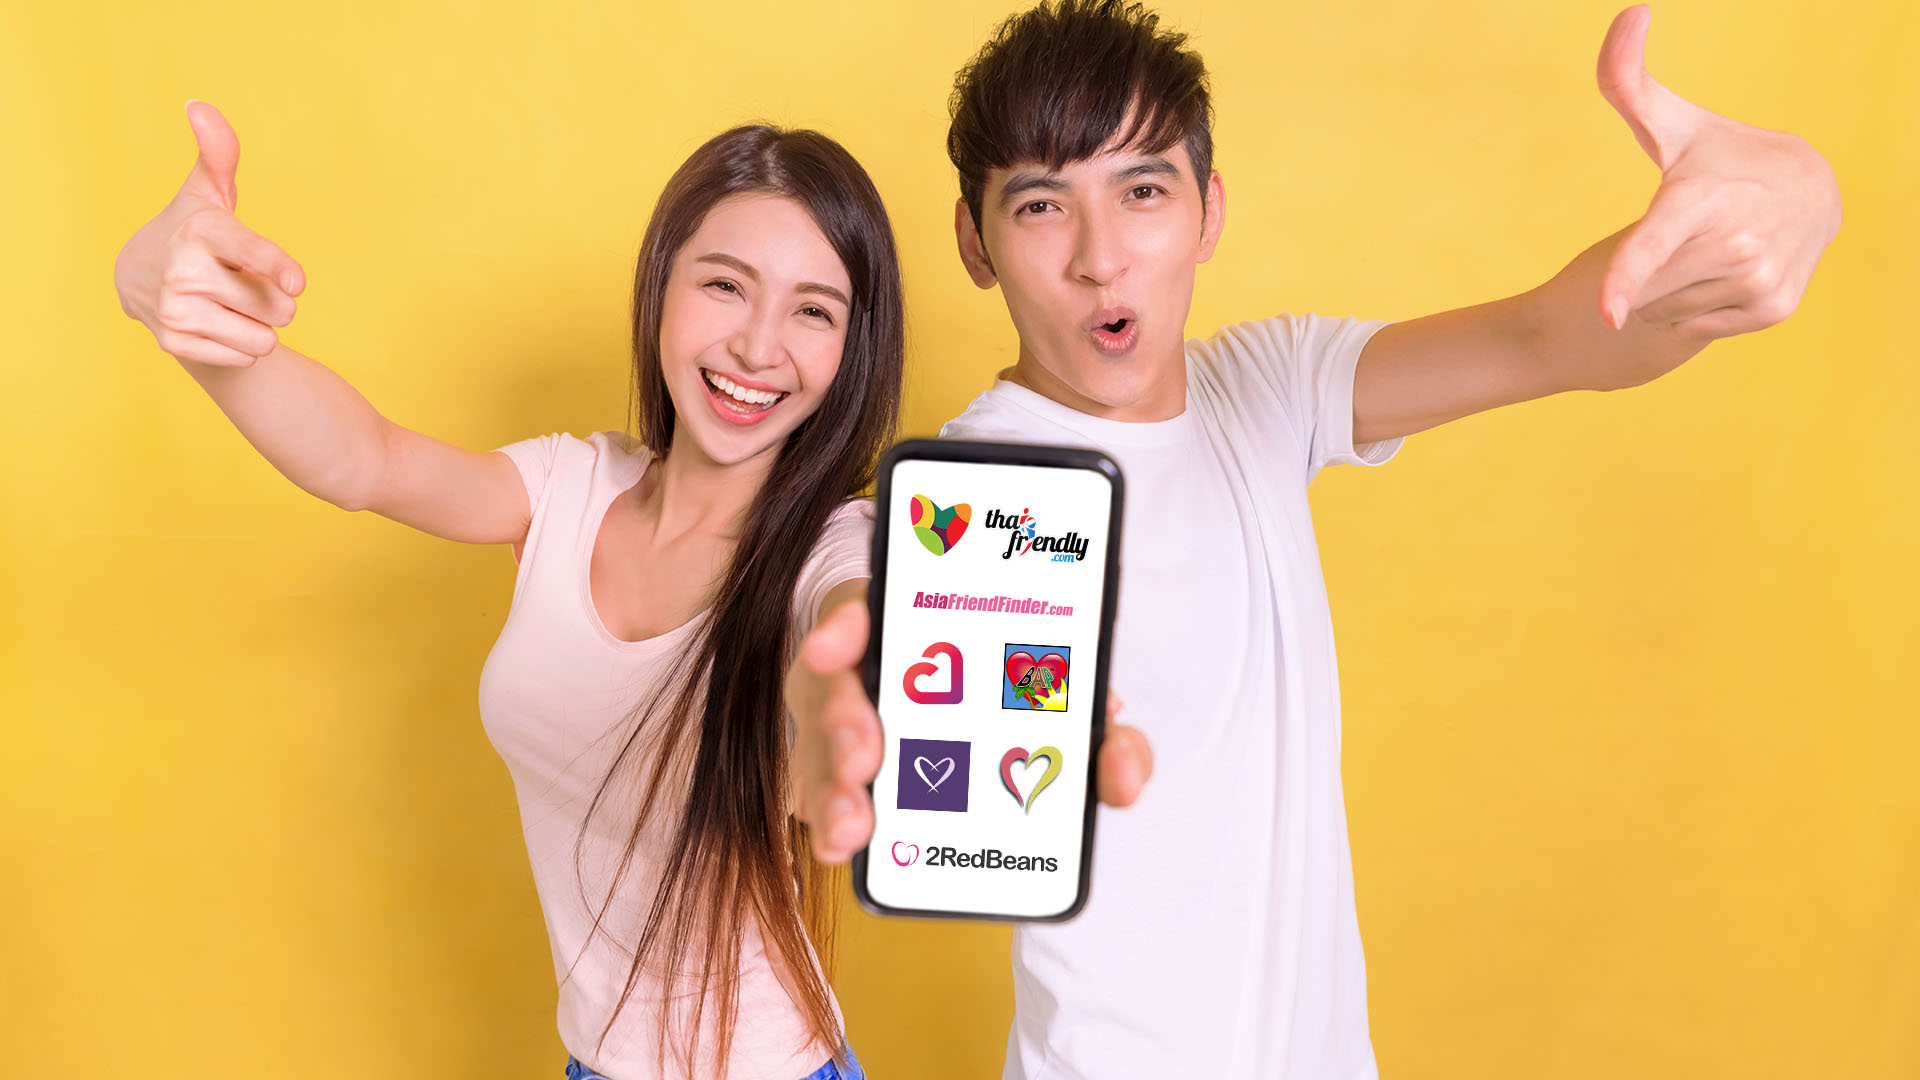 Brunette man and woman giving the thumbs up while pointing at the phone they are holding. Yellow background.